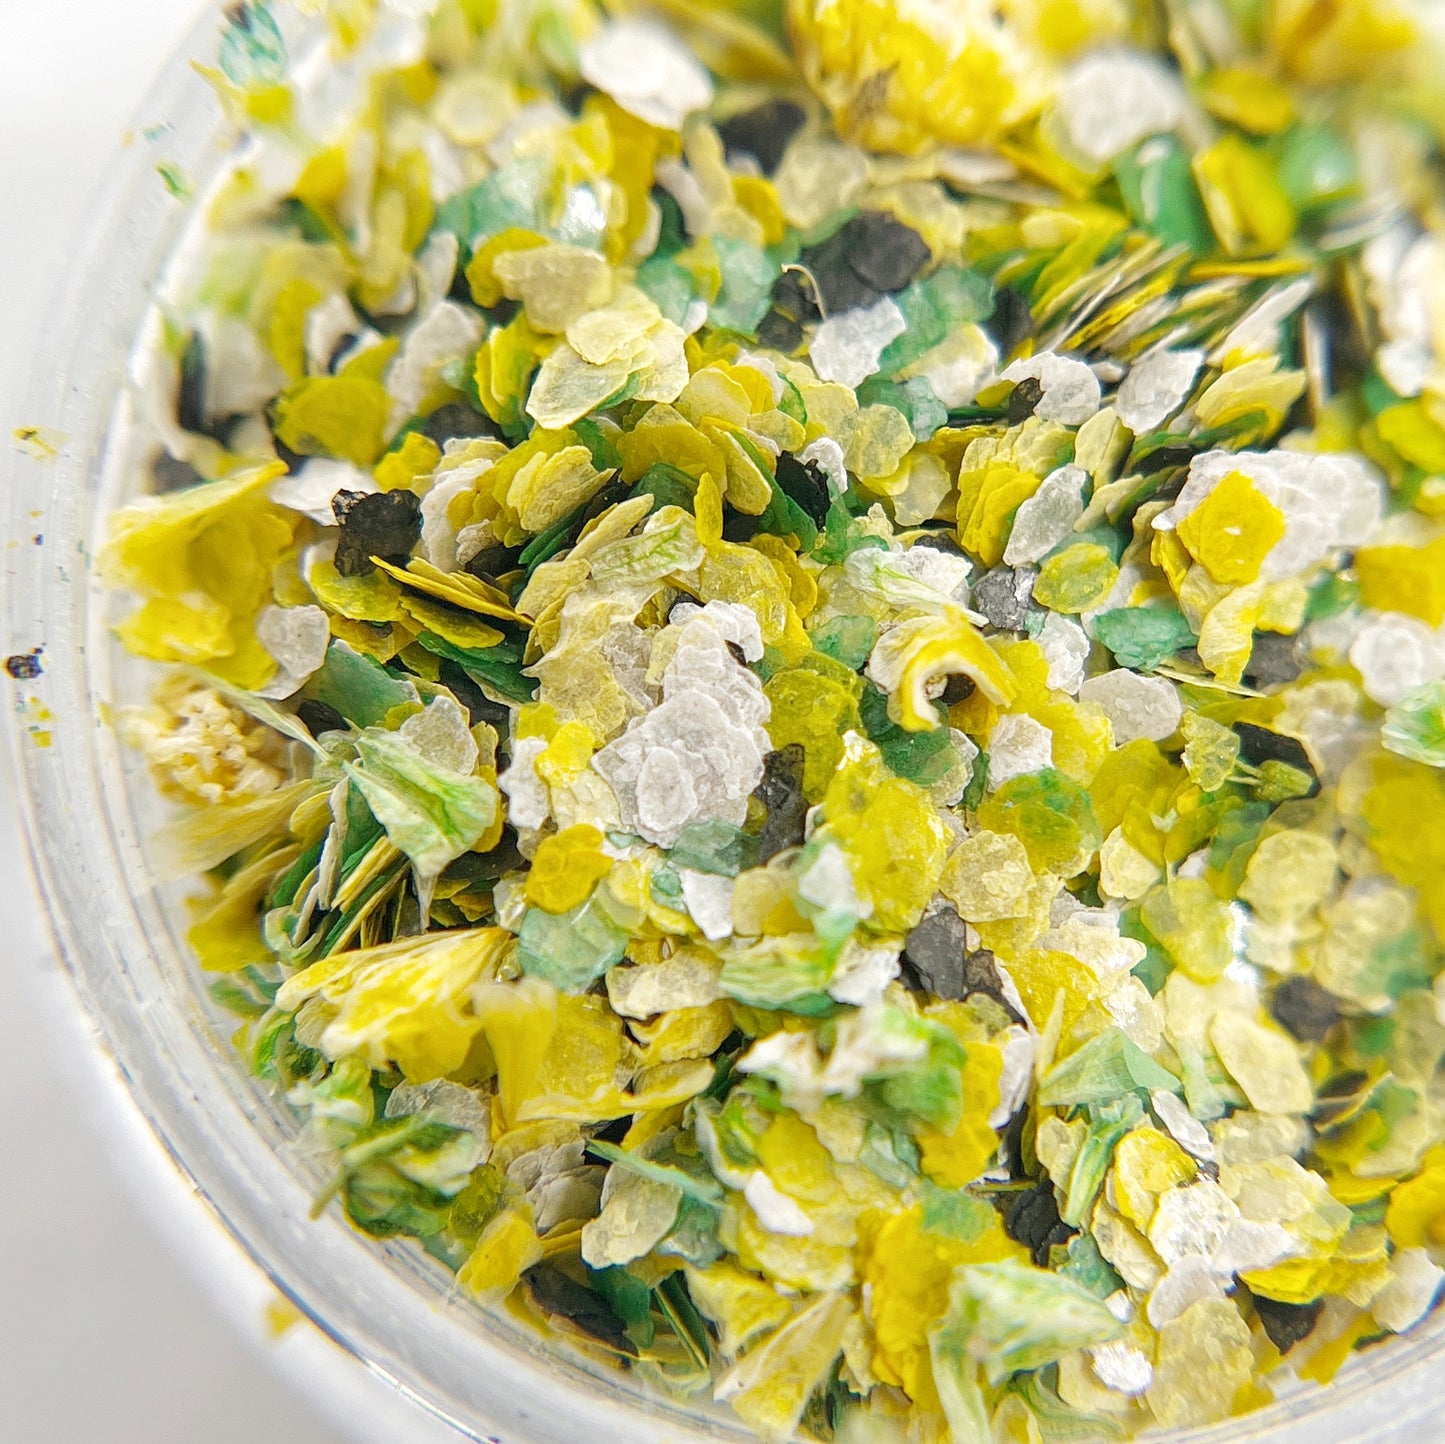 Confetti Crush Collection in Clover Crush - Colorful Mix of Mica Speckles and Dried Flower Petals in Jar, Featuring Yellow, Green, White, and Black Colors.